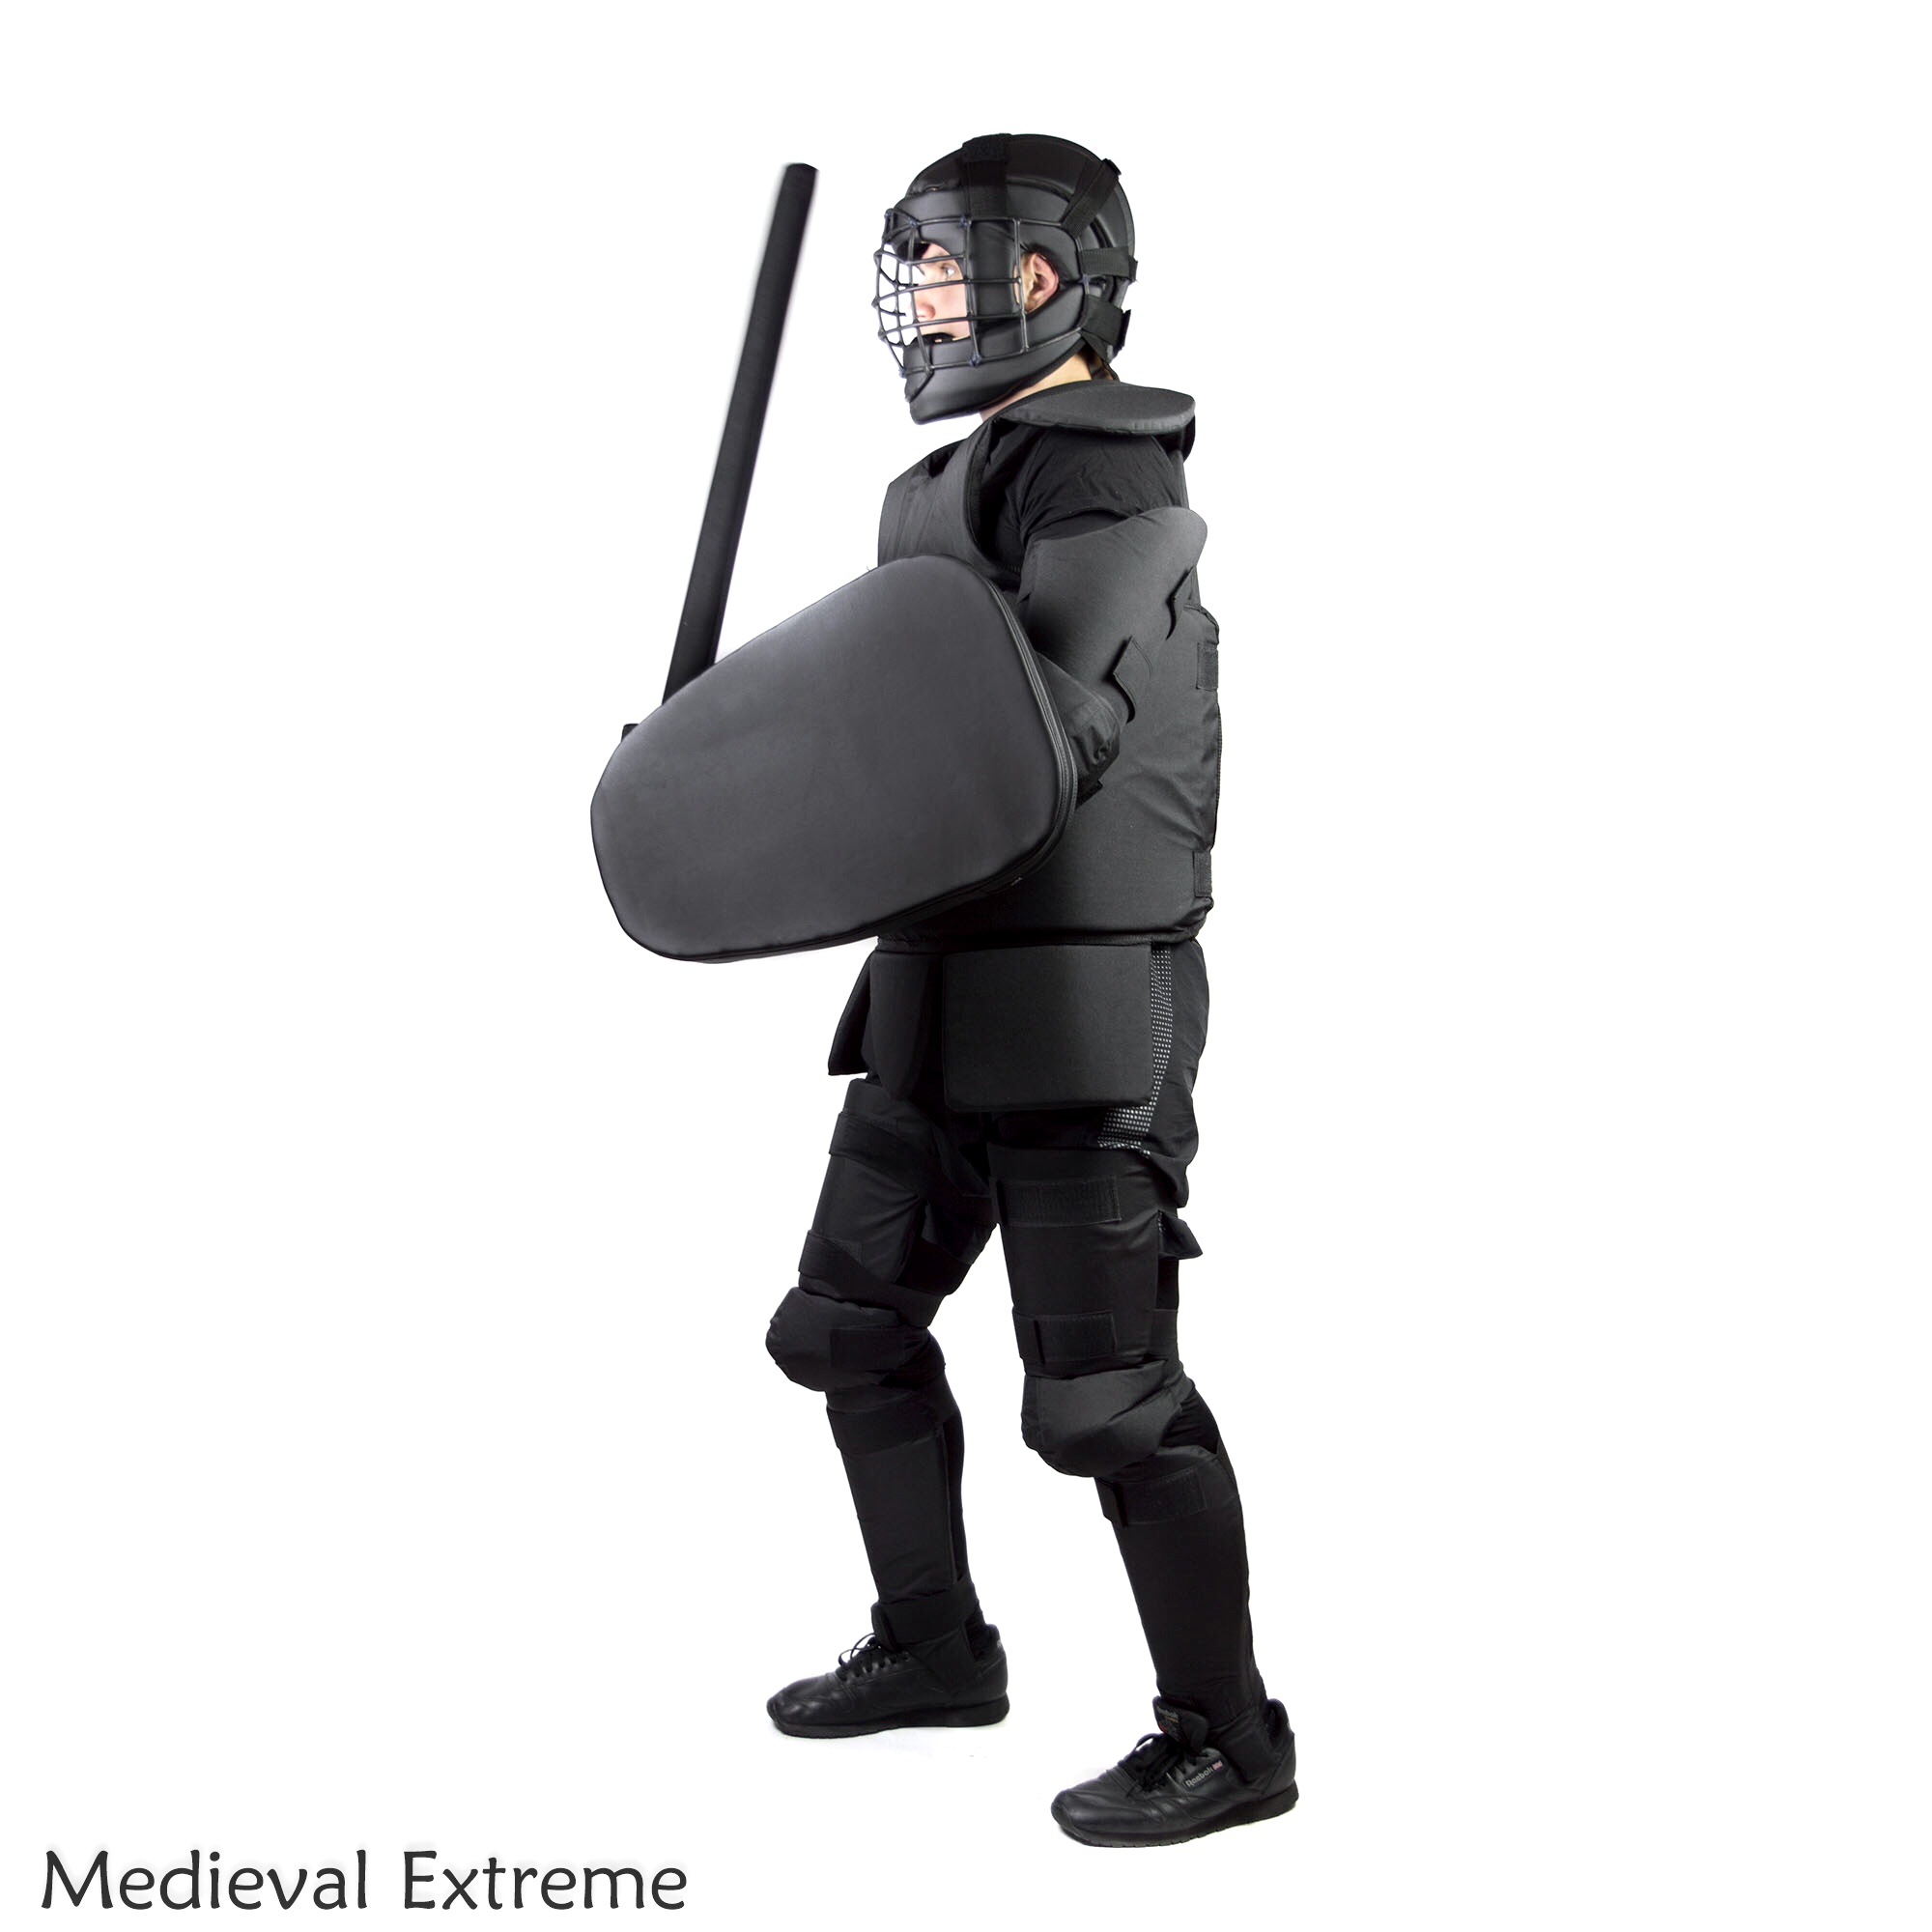 Full training kit for armored combat bundle • Medieval Extreme